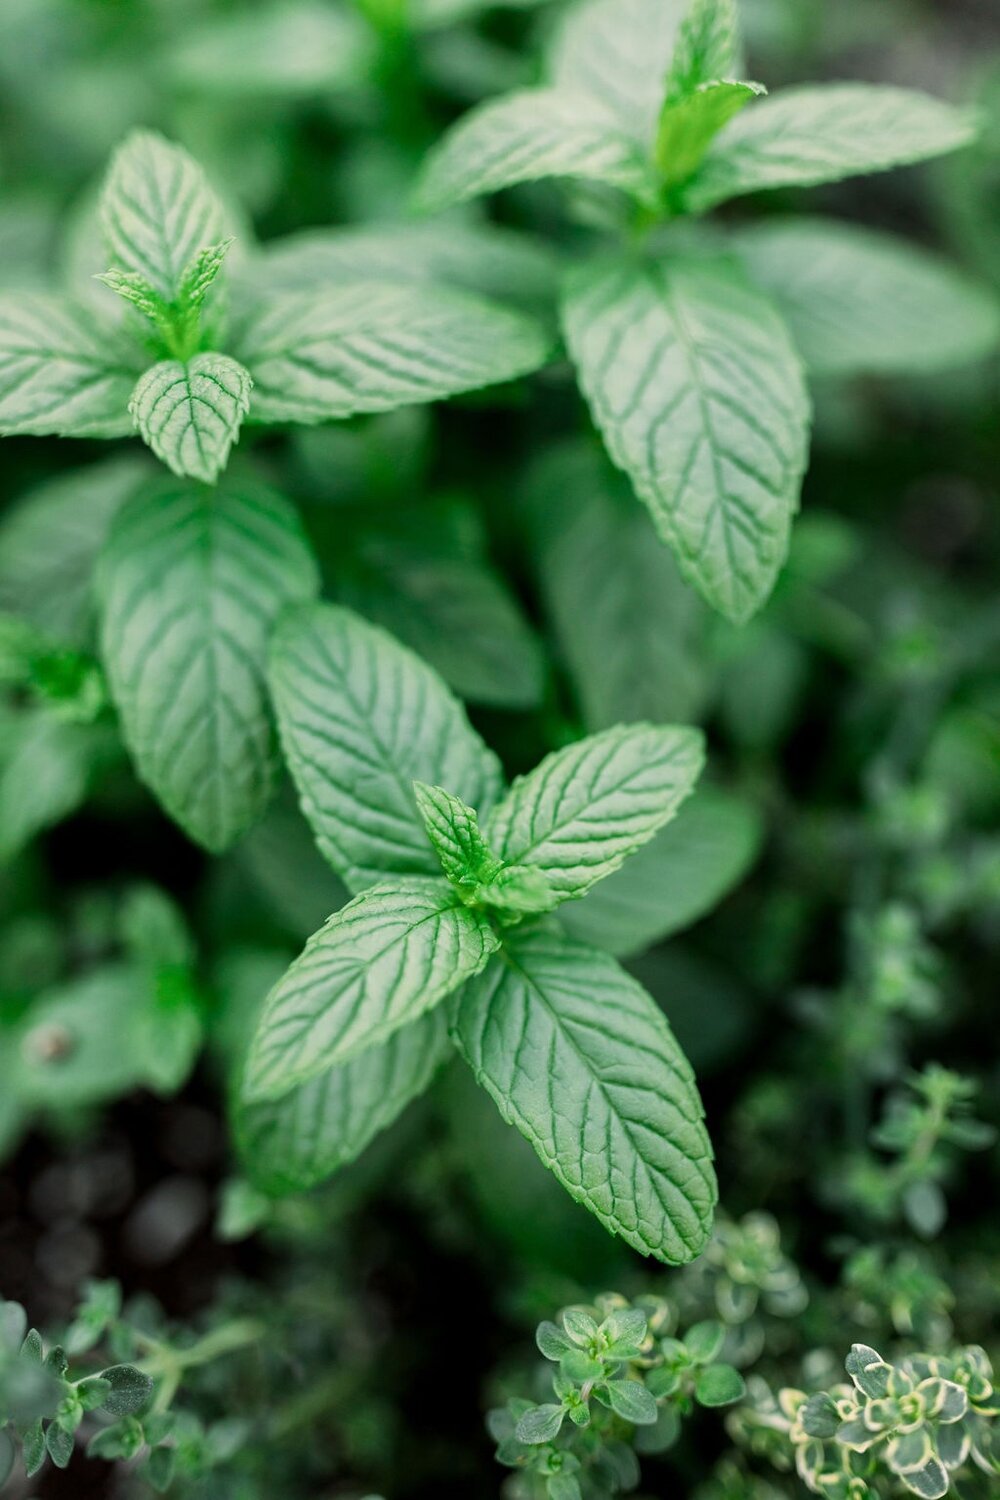 10 fun ways to use fresh mint leaves in your garden and home